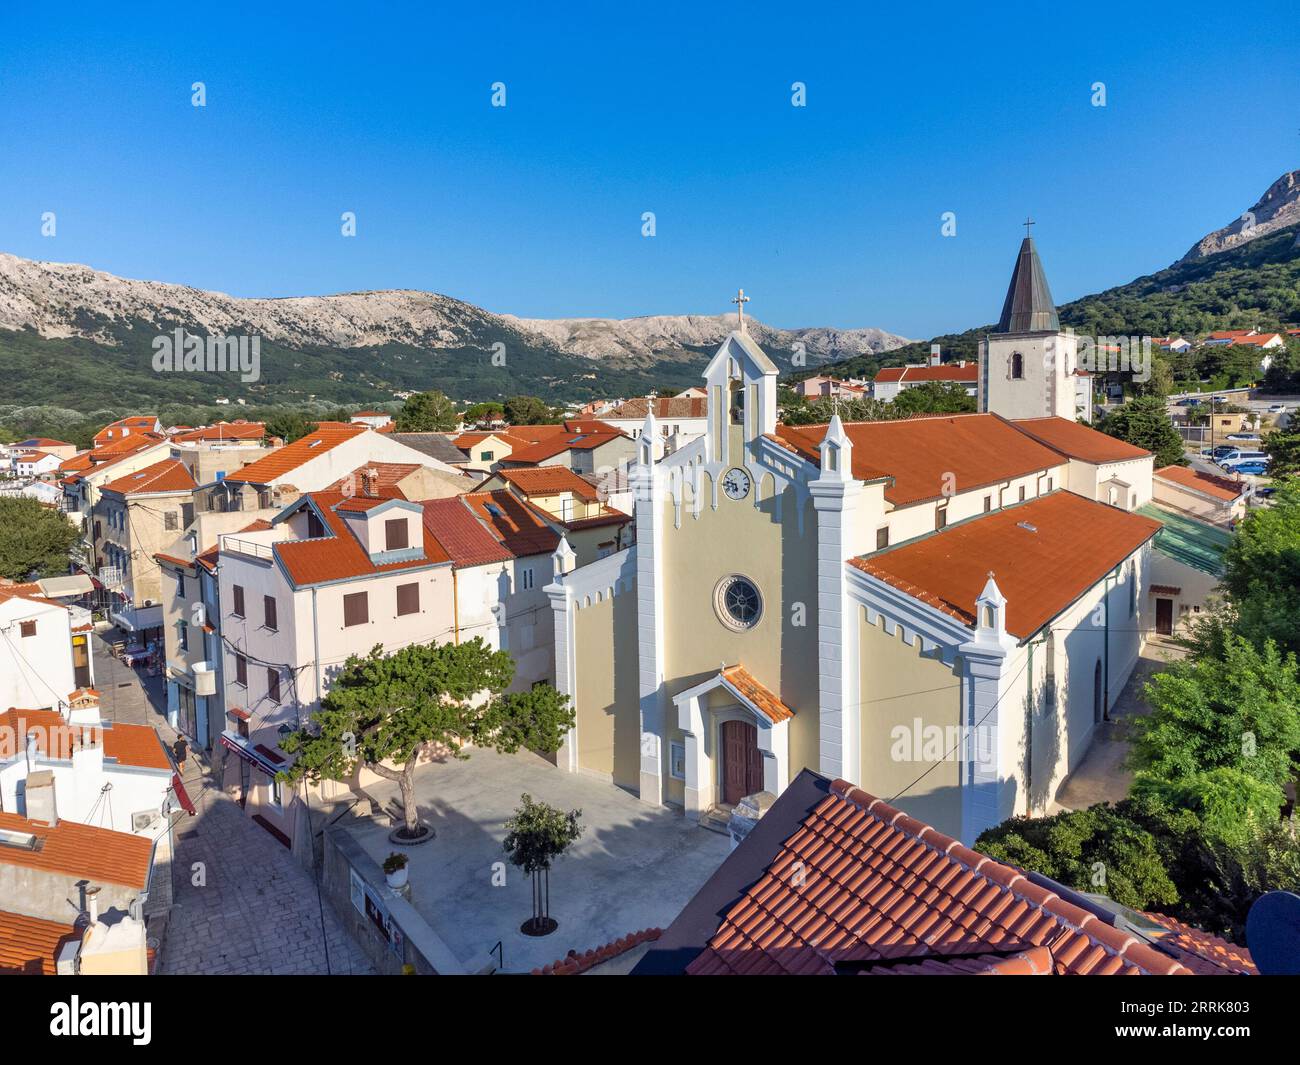 Croatia, Kvarner bay, Primorje Gorski Kotar County, island of Krk, elevated view of Baska with details on the church of the Holy Trinity Stock Photo